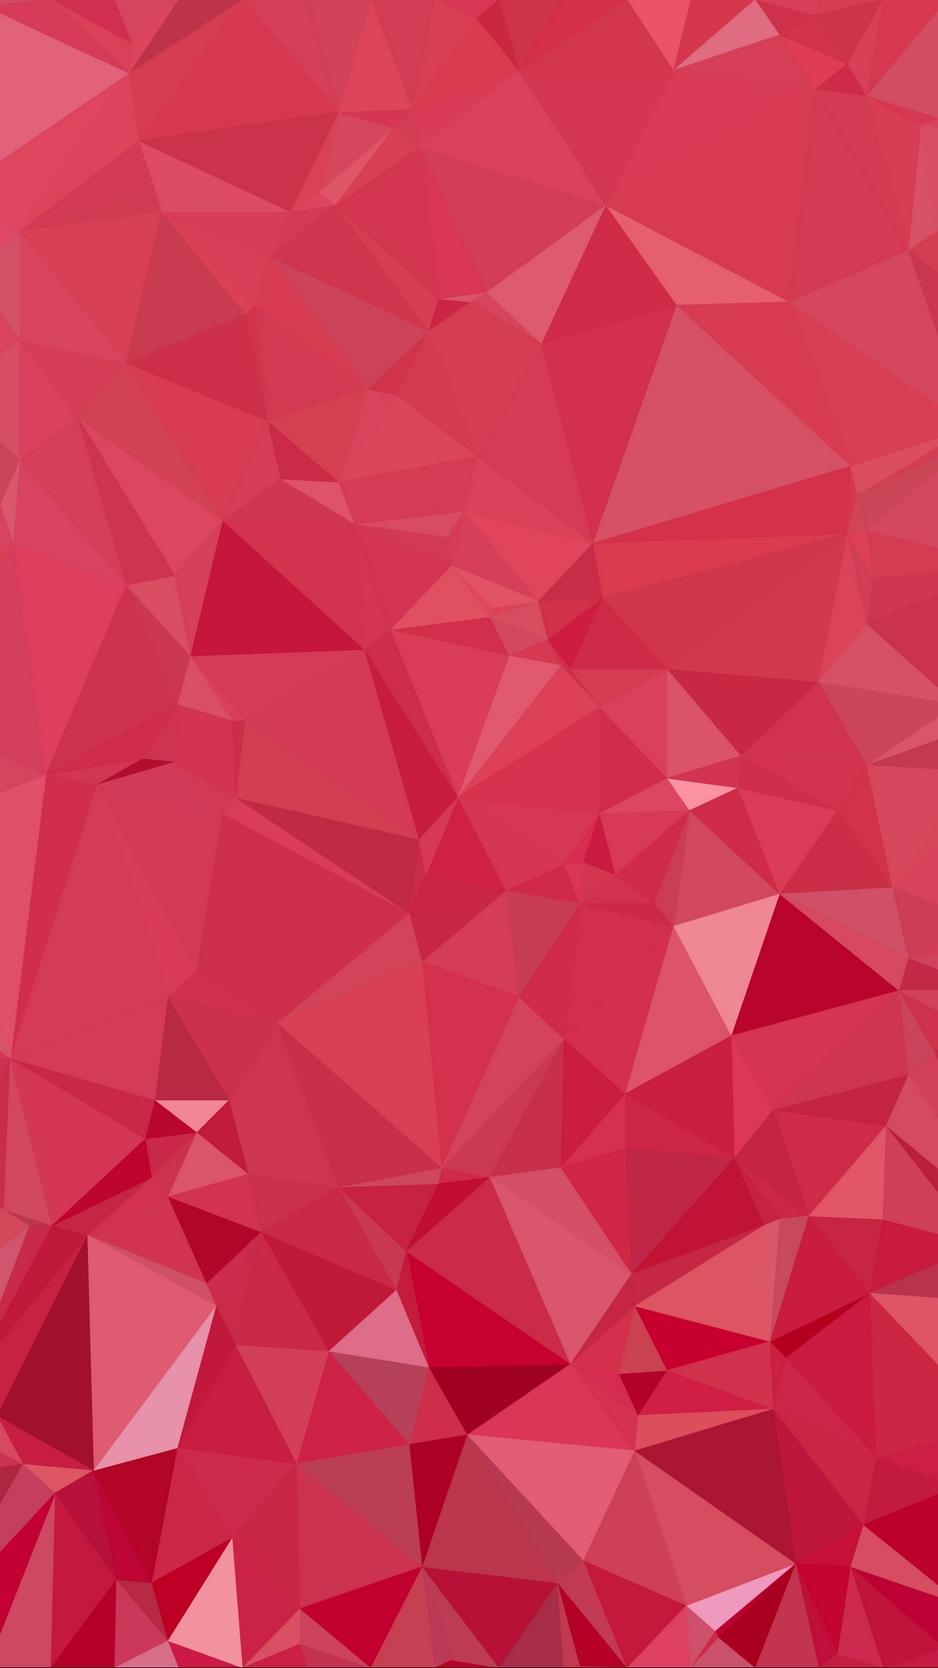 Download wallpaper 938x1668 polygon, triangles, geometric, red